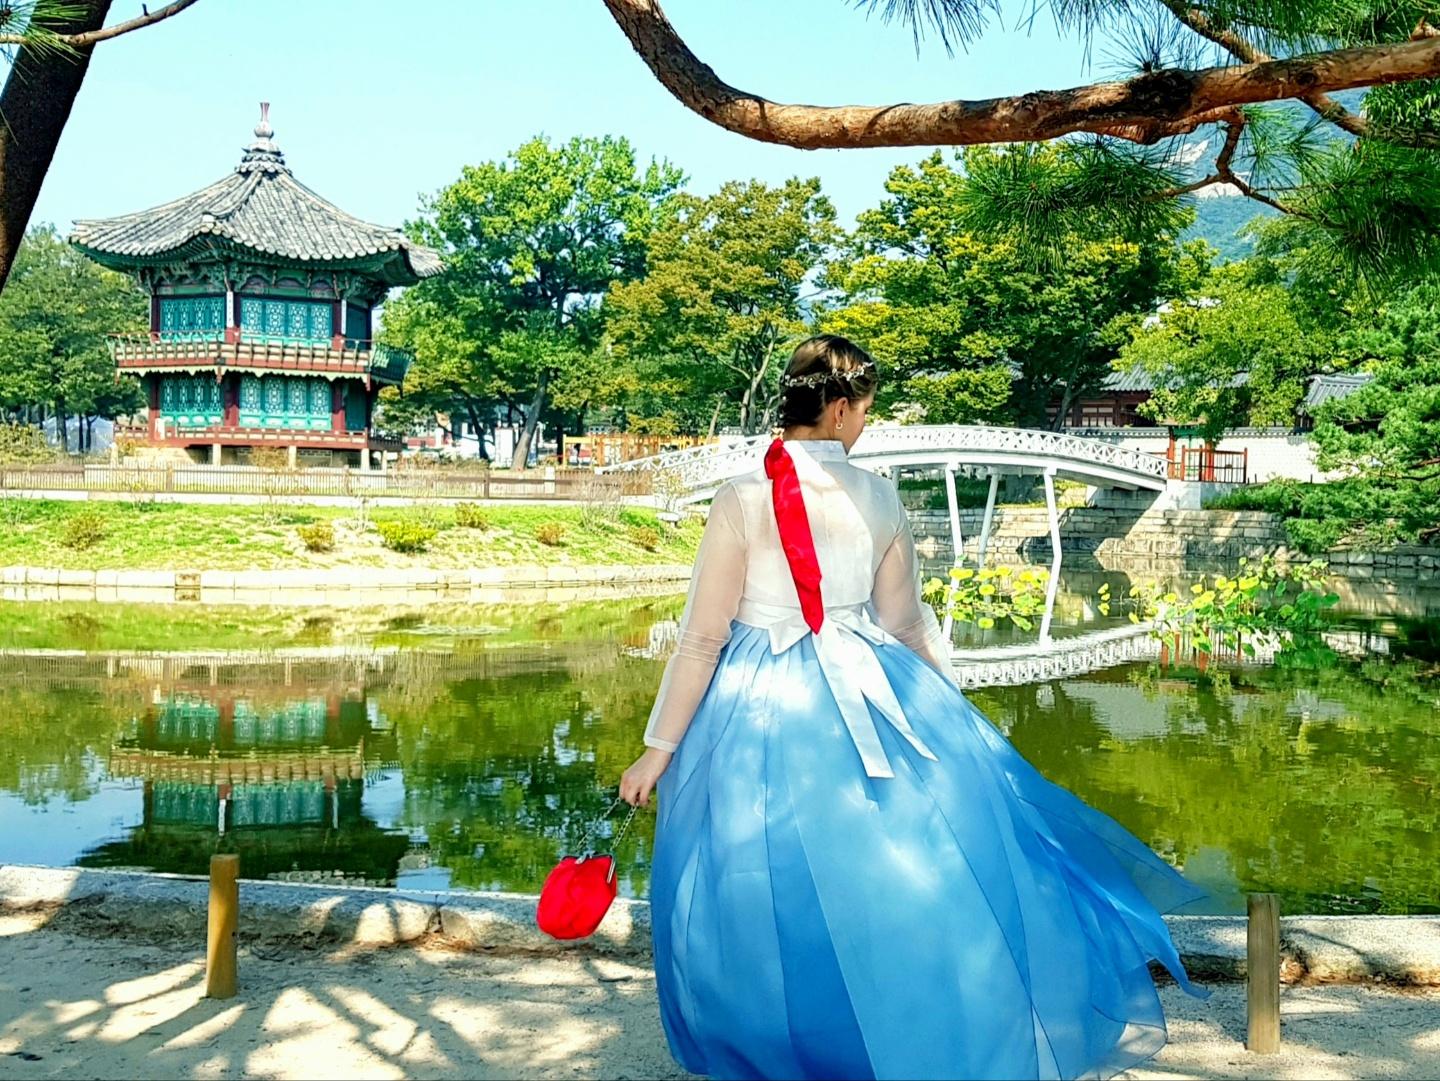 Visitors in traditional Korean dresses rent hanbok at Gyeongbokgung palace rental shop near a water feature, surrounded by lush greenery and trees with a temple in the background.